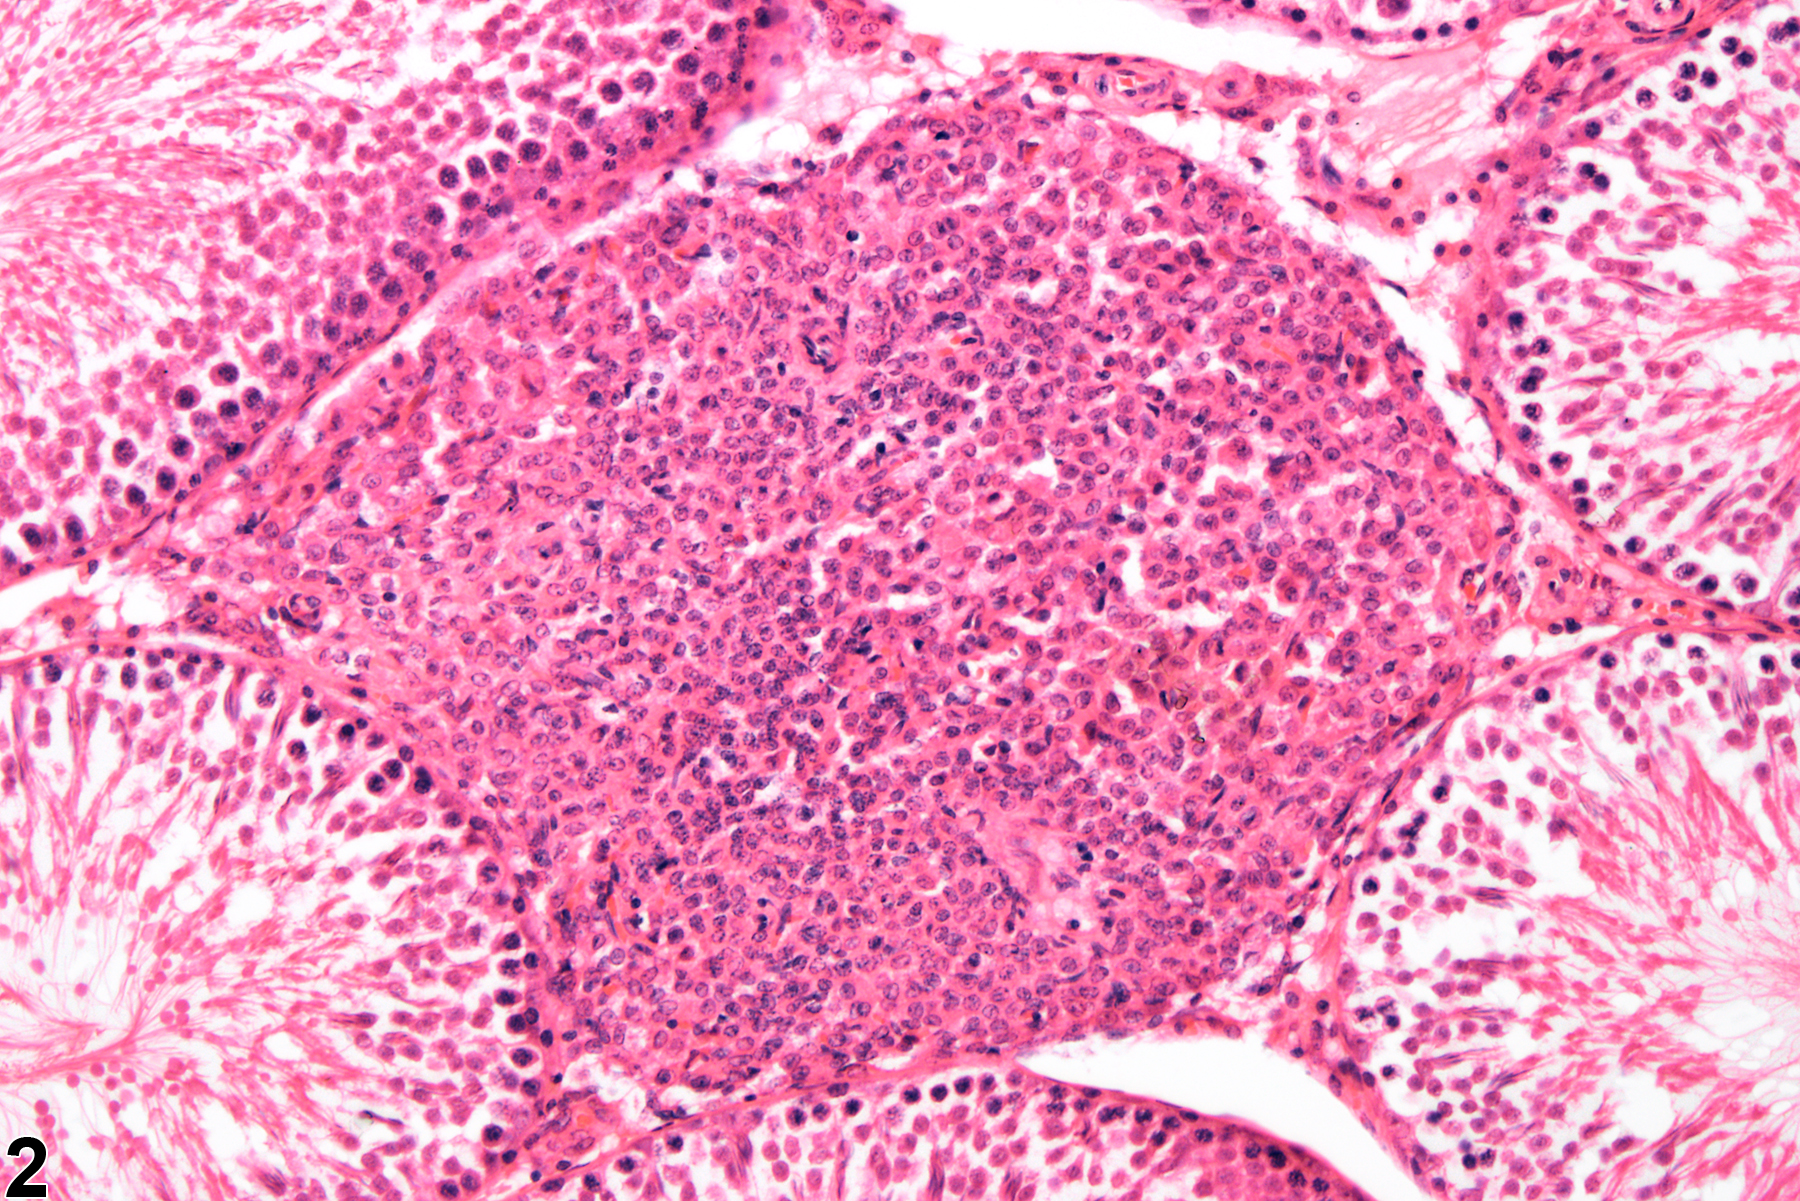 Image of interstitial cell hyperplasia in the testis from a male F344/N rat in a chronic study